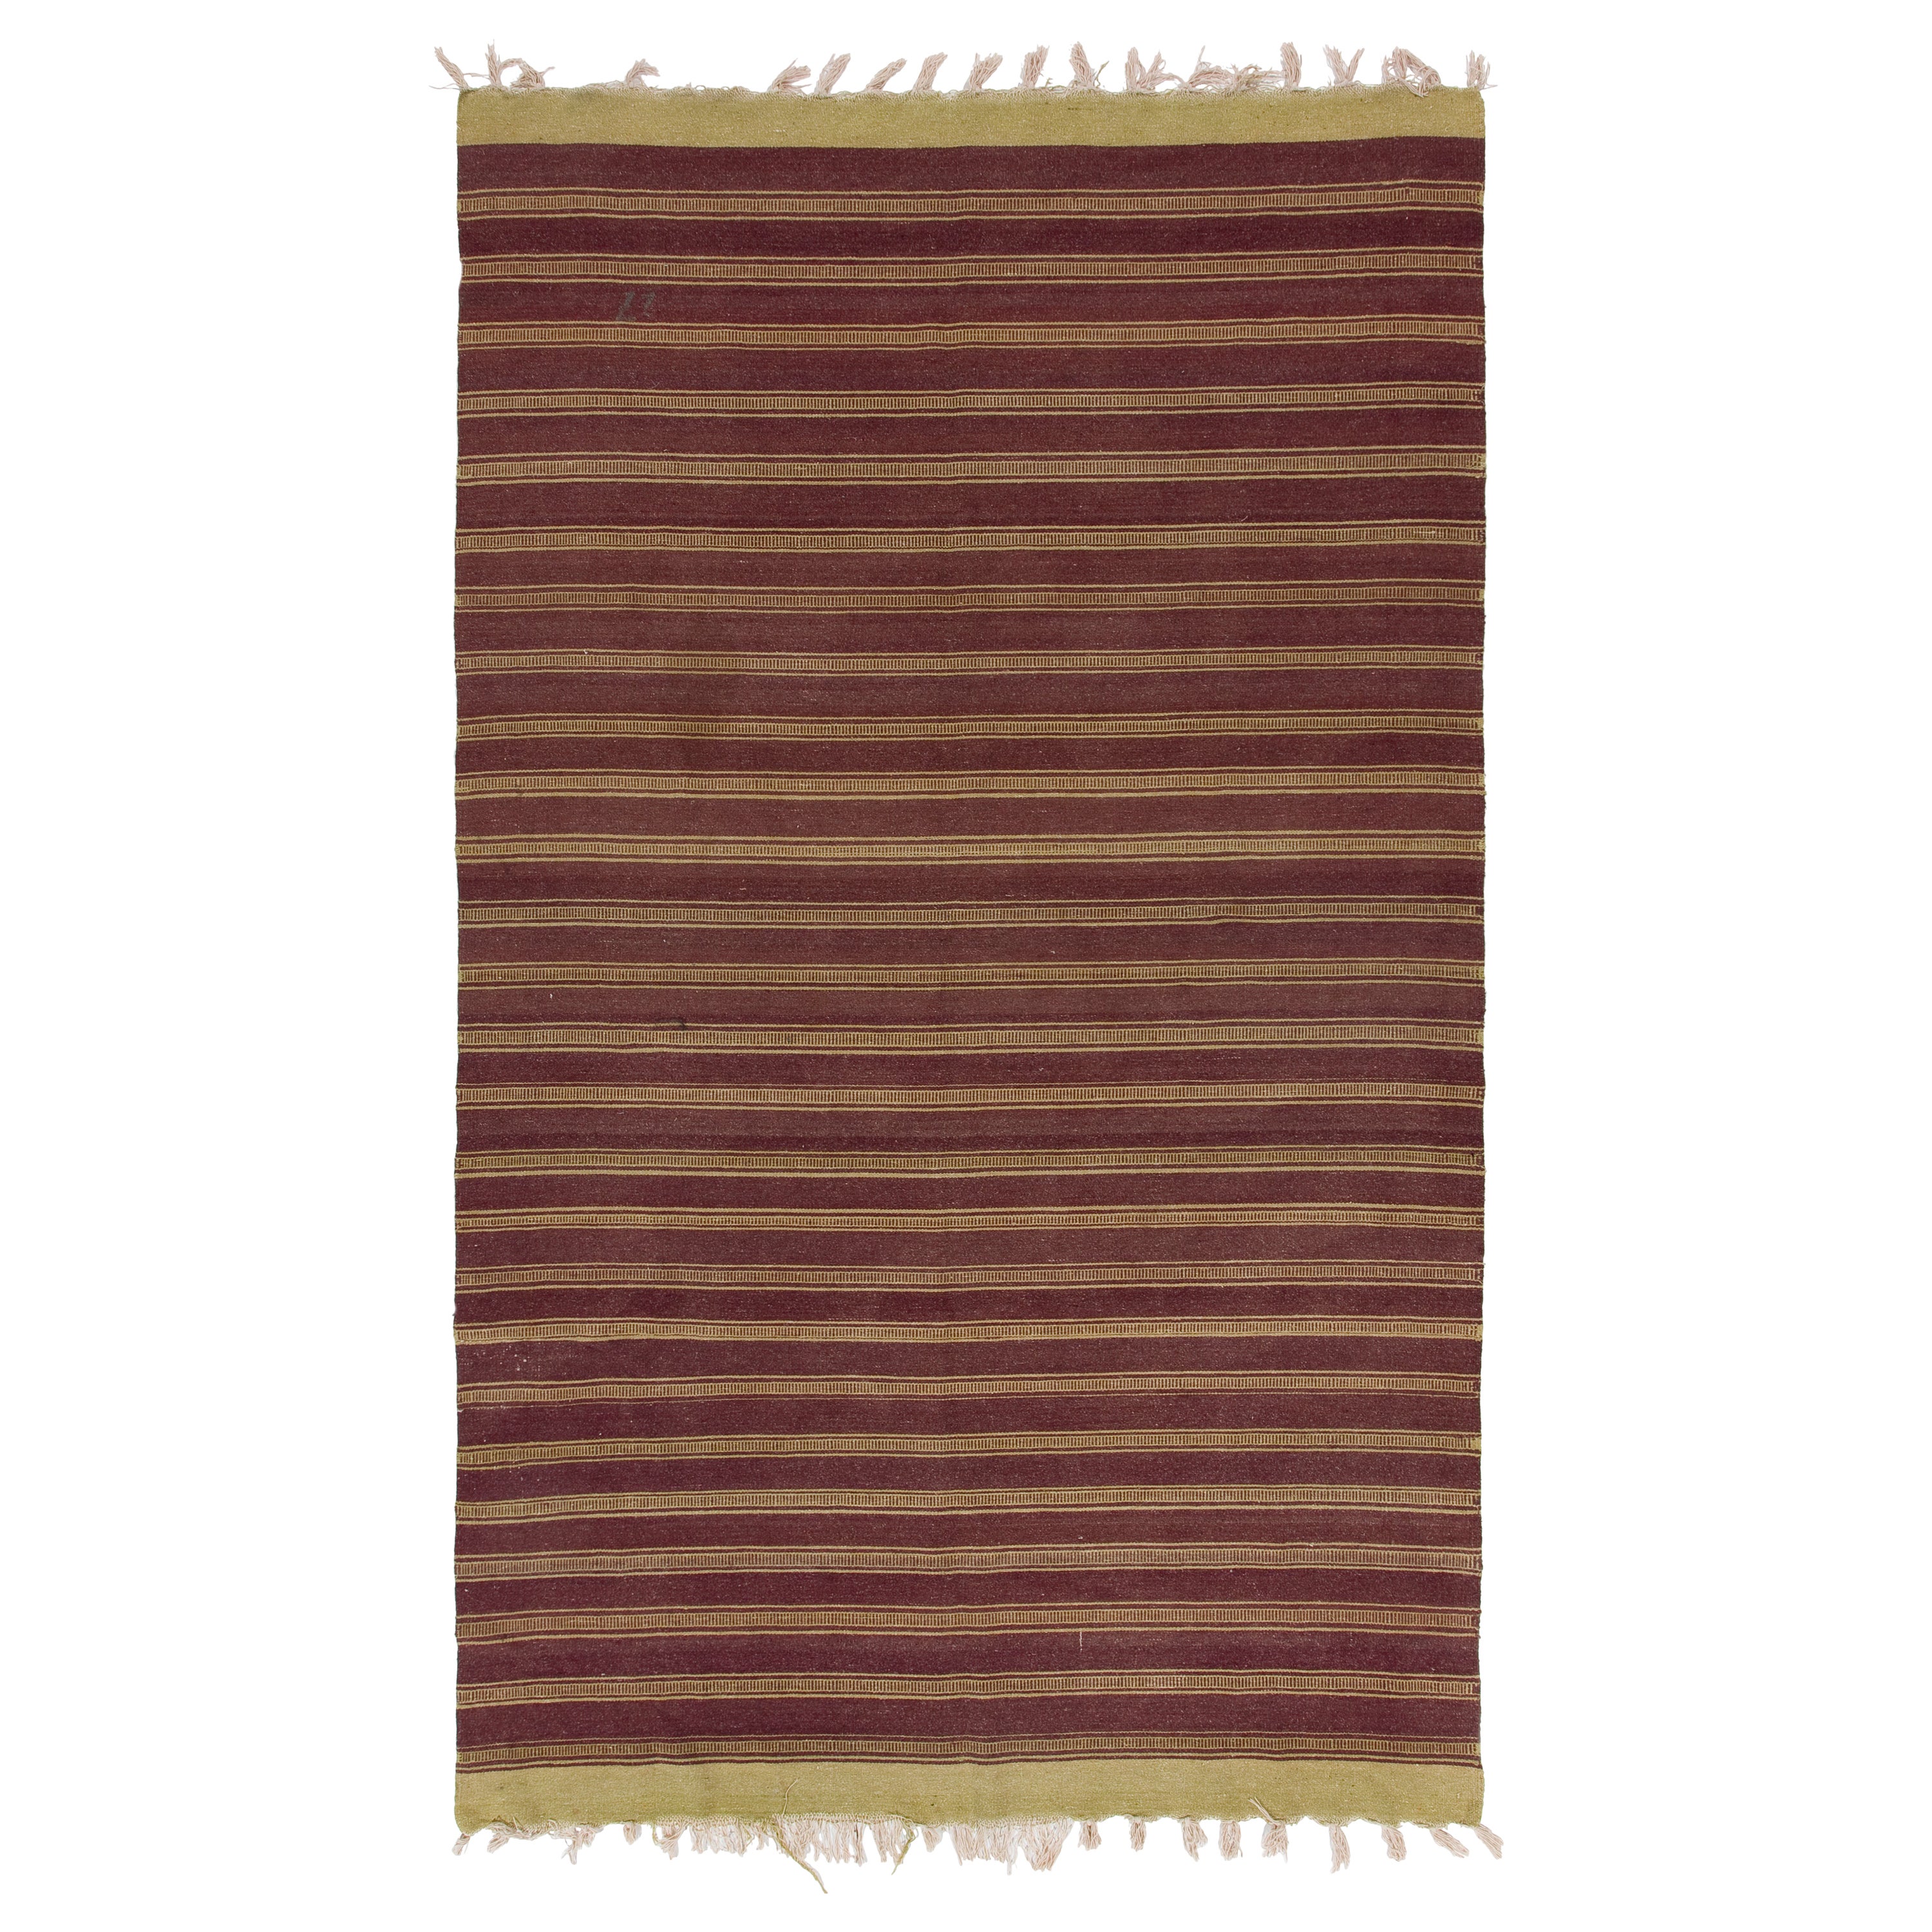 5.6x9 Ft Vintage Striped Handwoven Turkish Kilim 'Flat Weave', All Wool For Sale